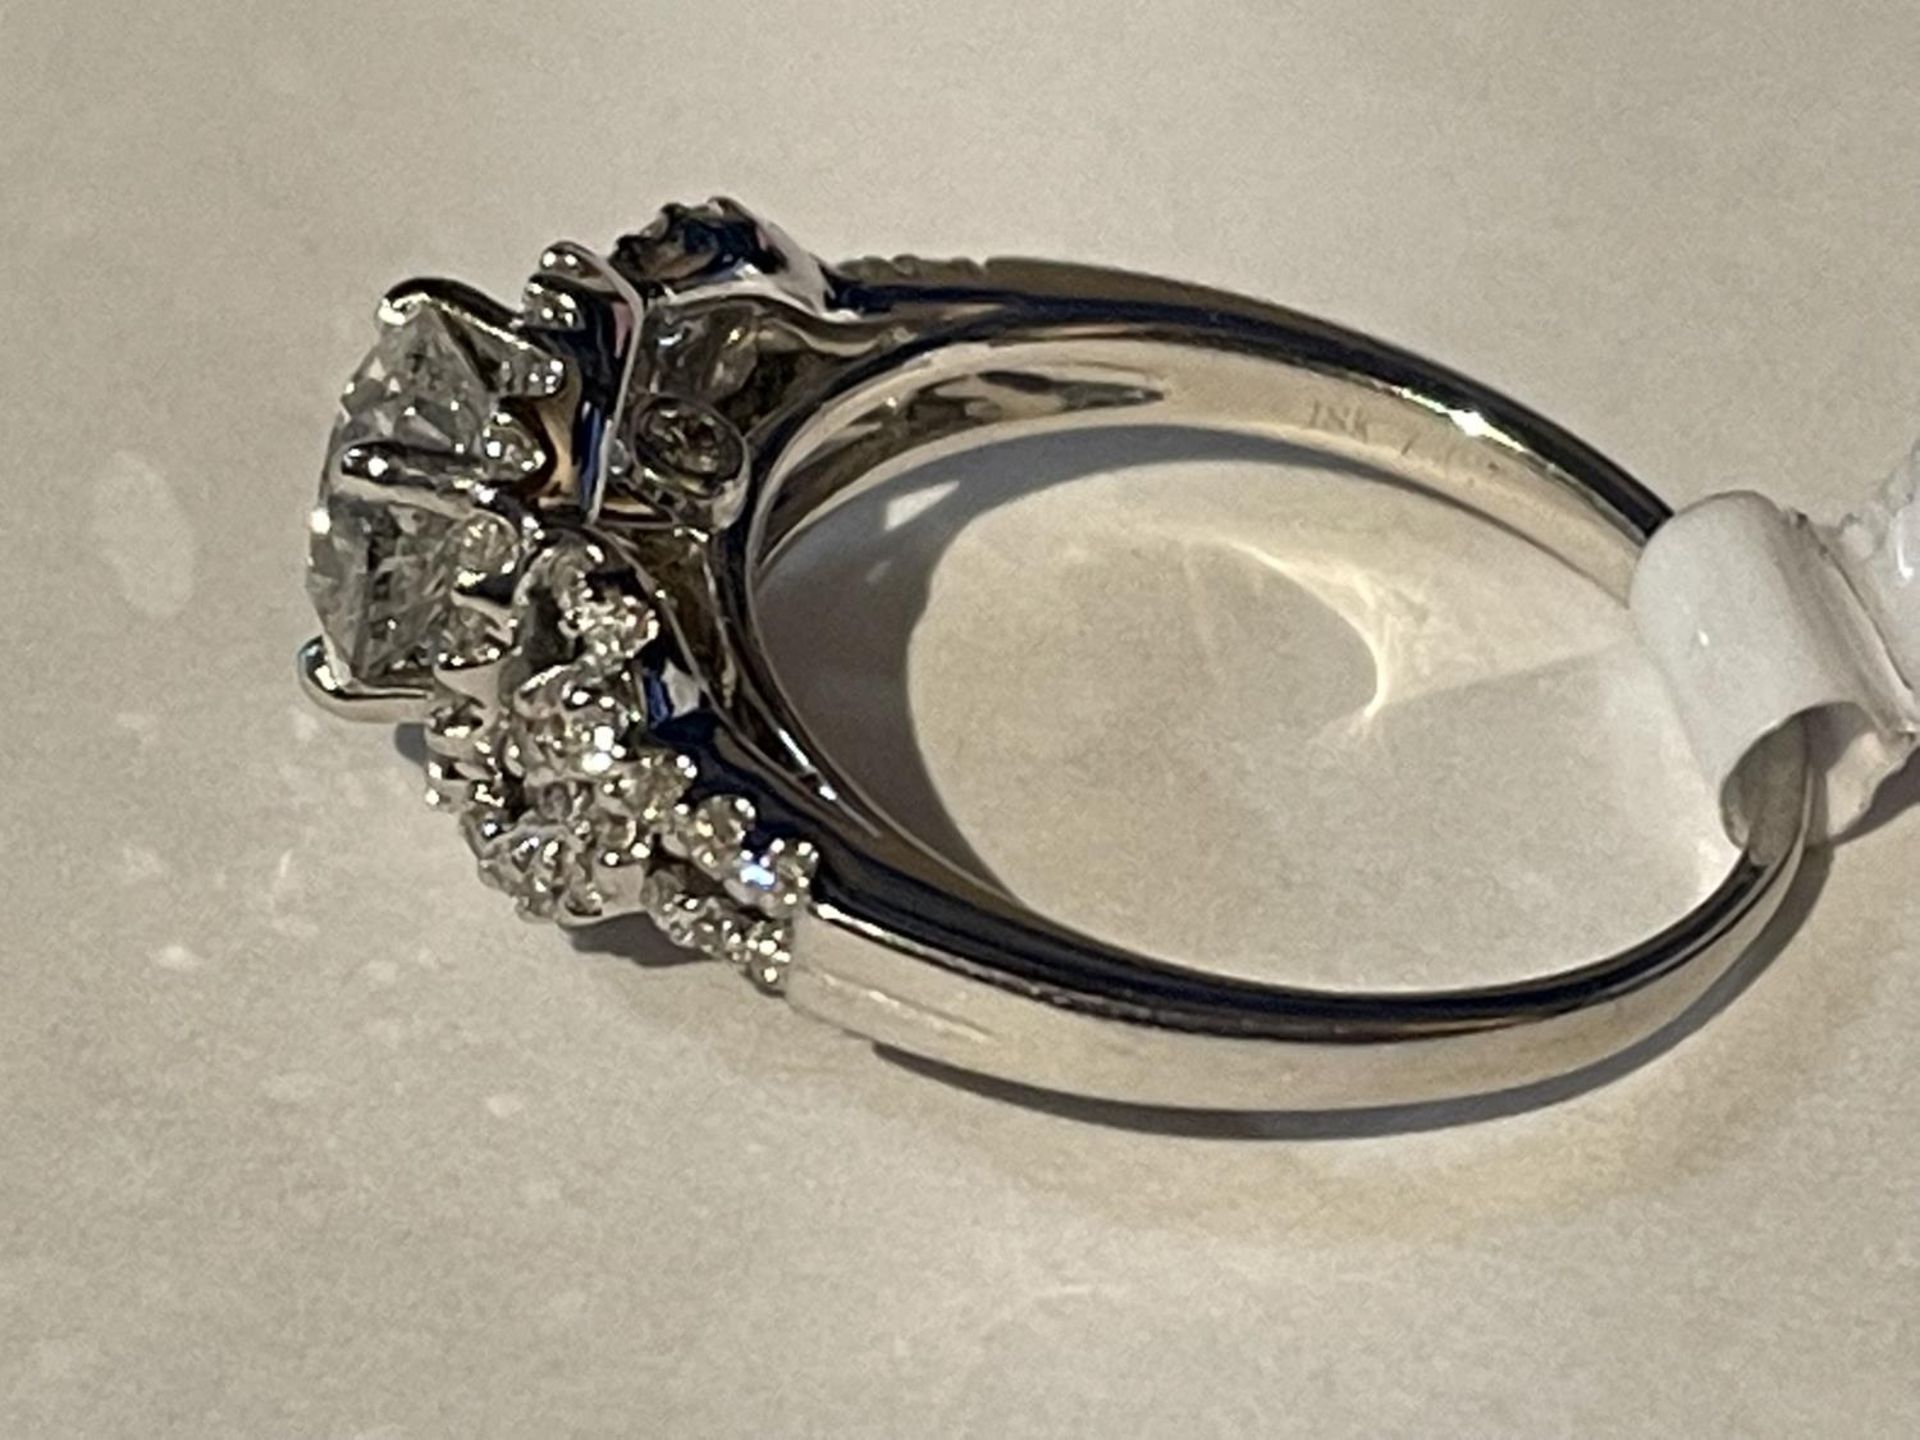 AN 18 CARAT WHITE GOLD RING WITH A CENTRAL 1.03CT SURROUNDED BY SMALL DIAMONDS MADE UP TO 0.30CT - Image 2 of 4